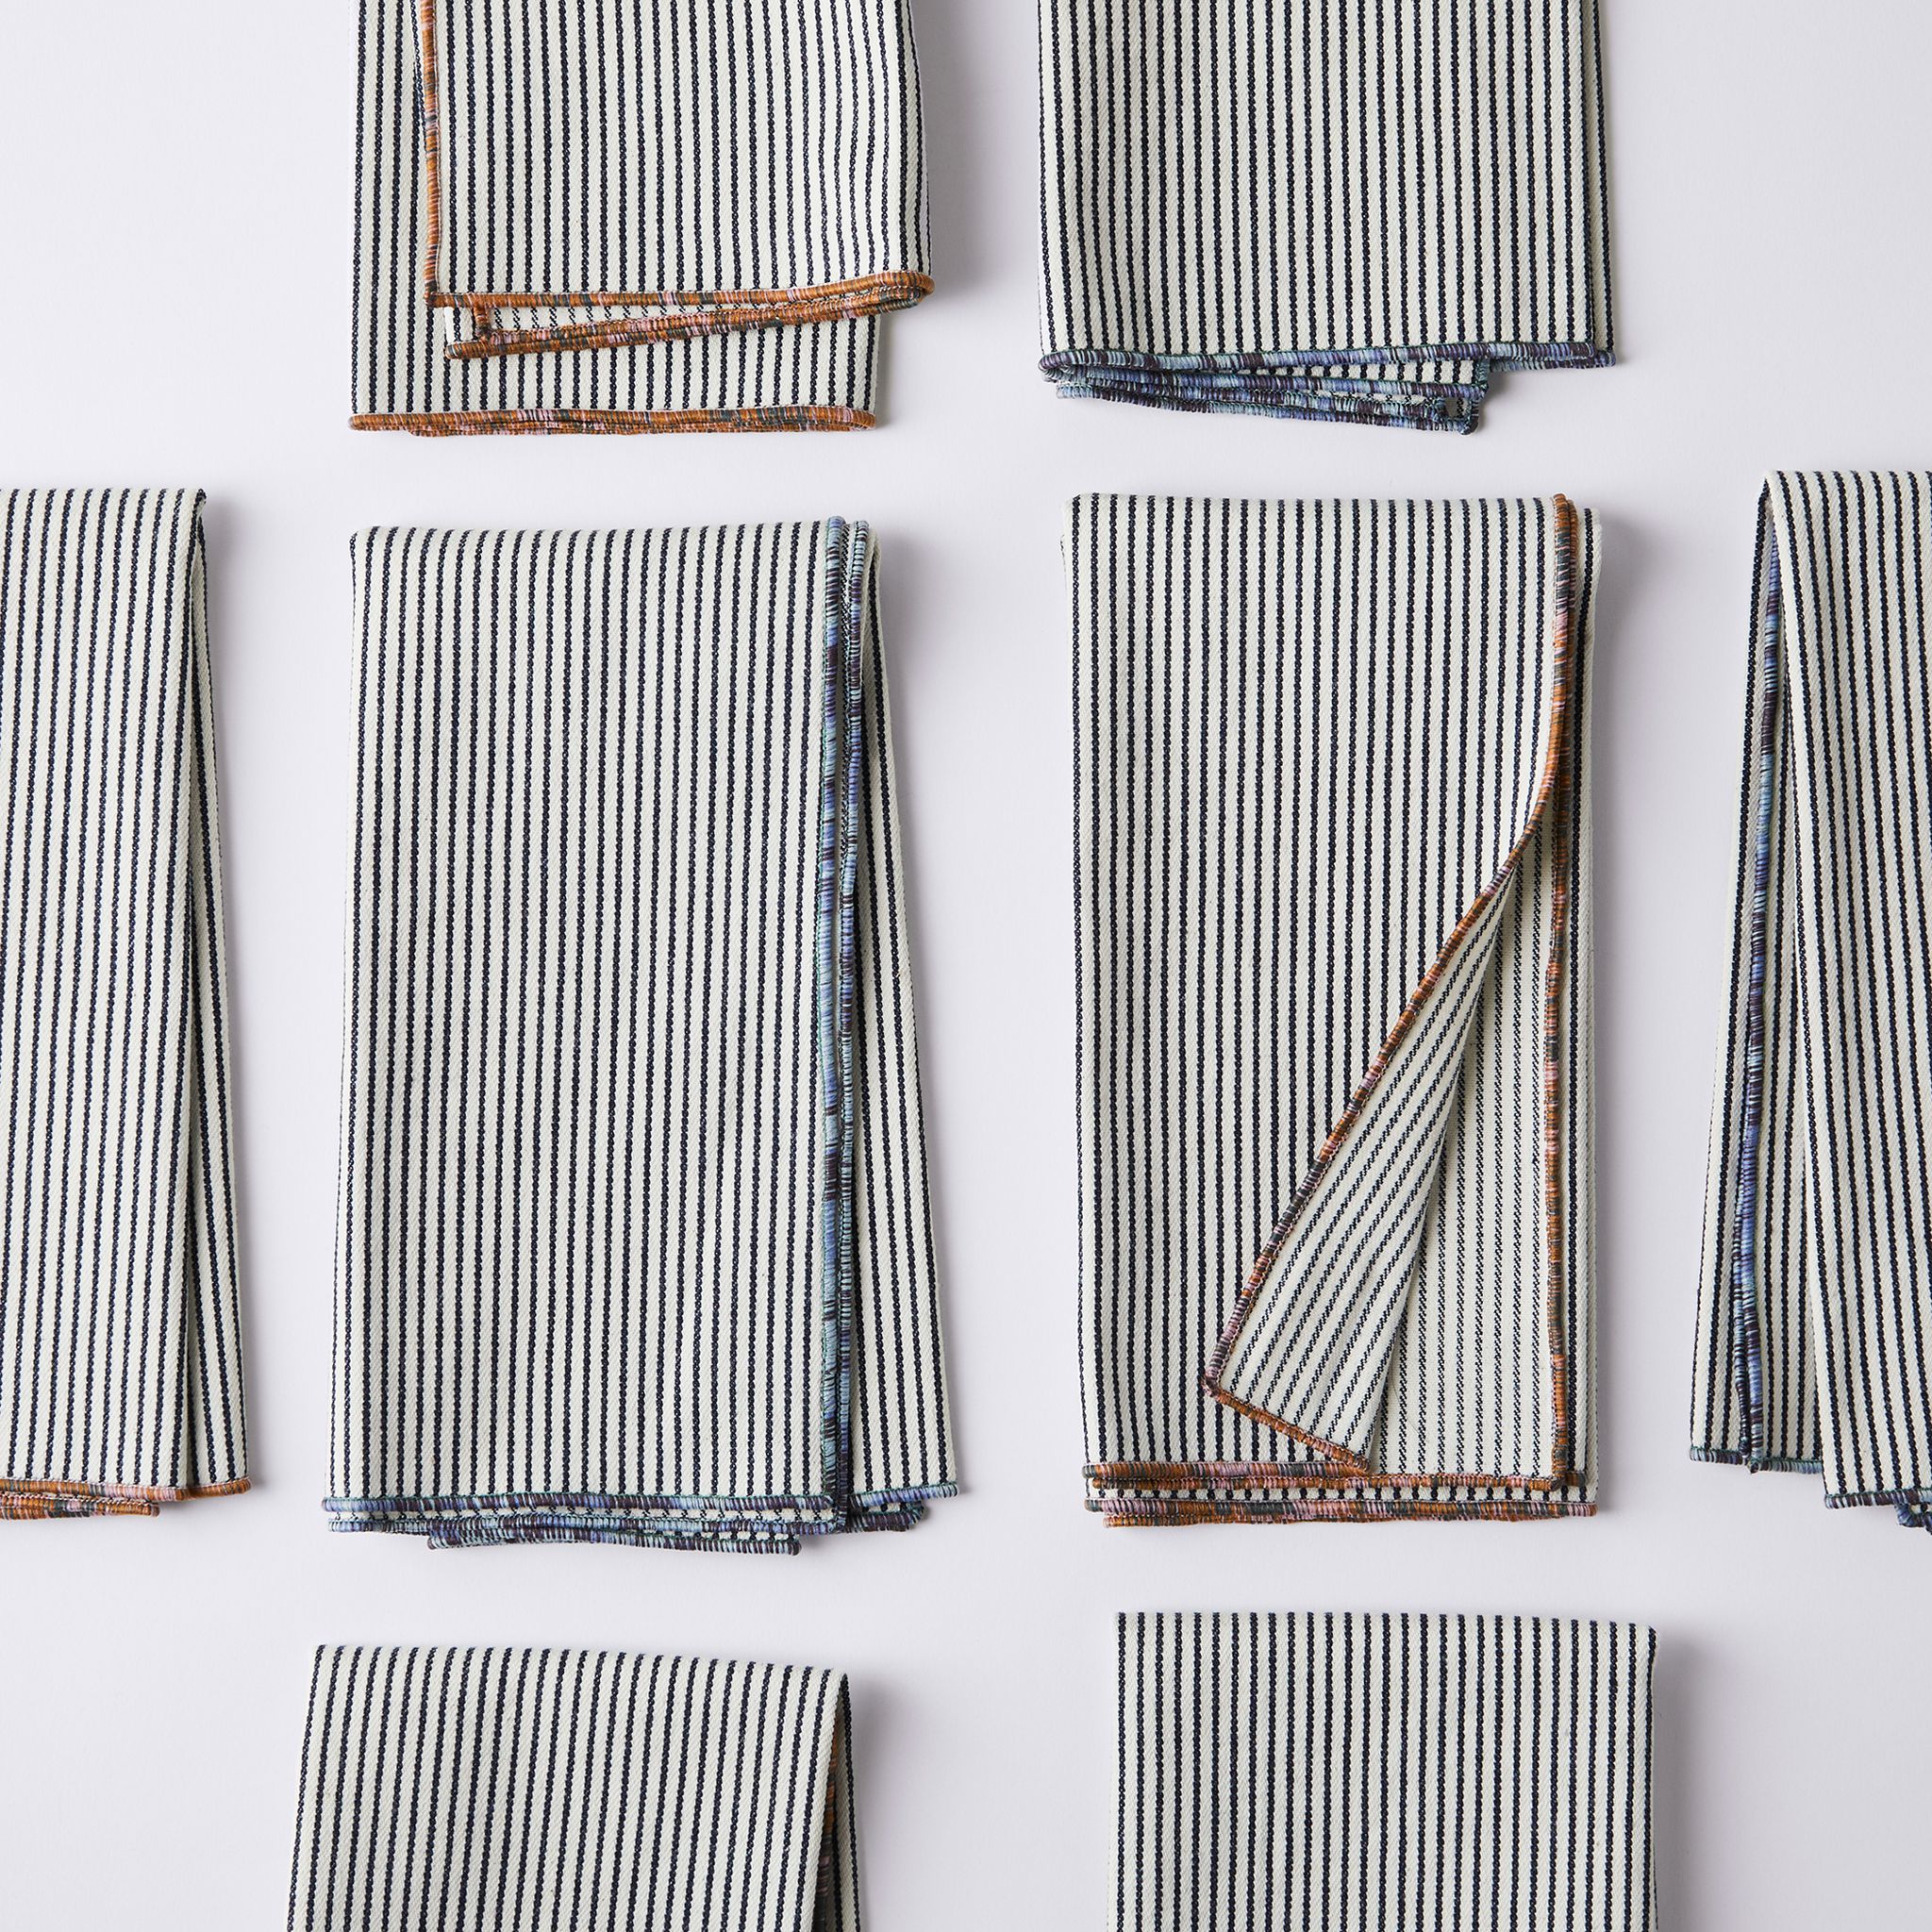 Reclaimed Striped Patterned Napkins, Limited Edition